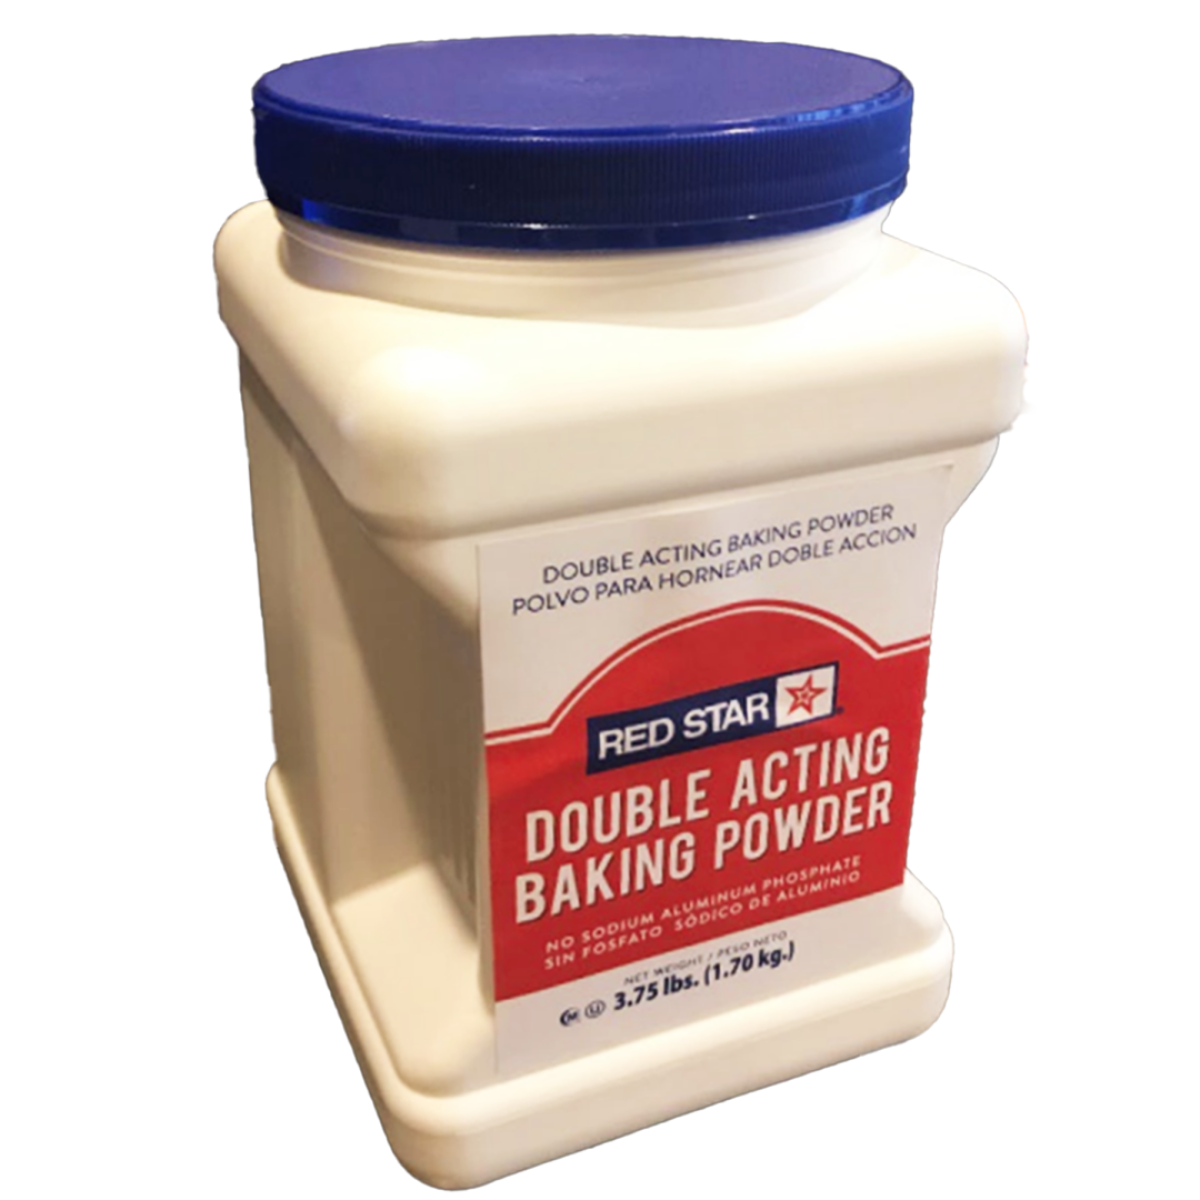 RED STAR DOUBLE ACTING BAKING POWDER